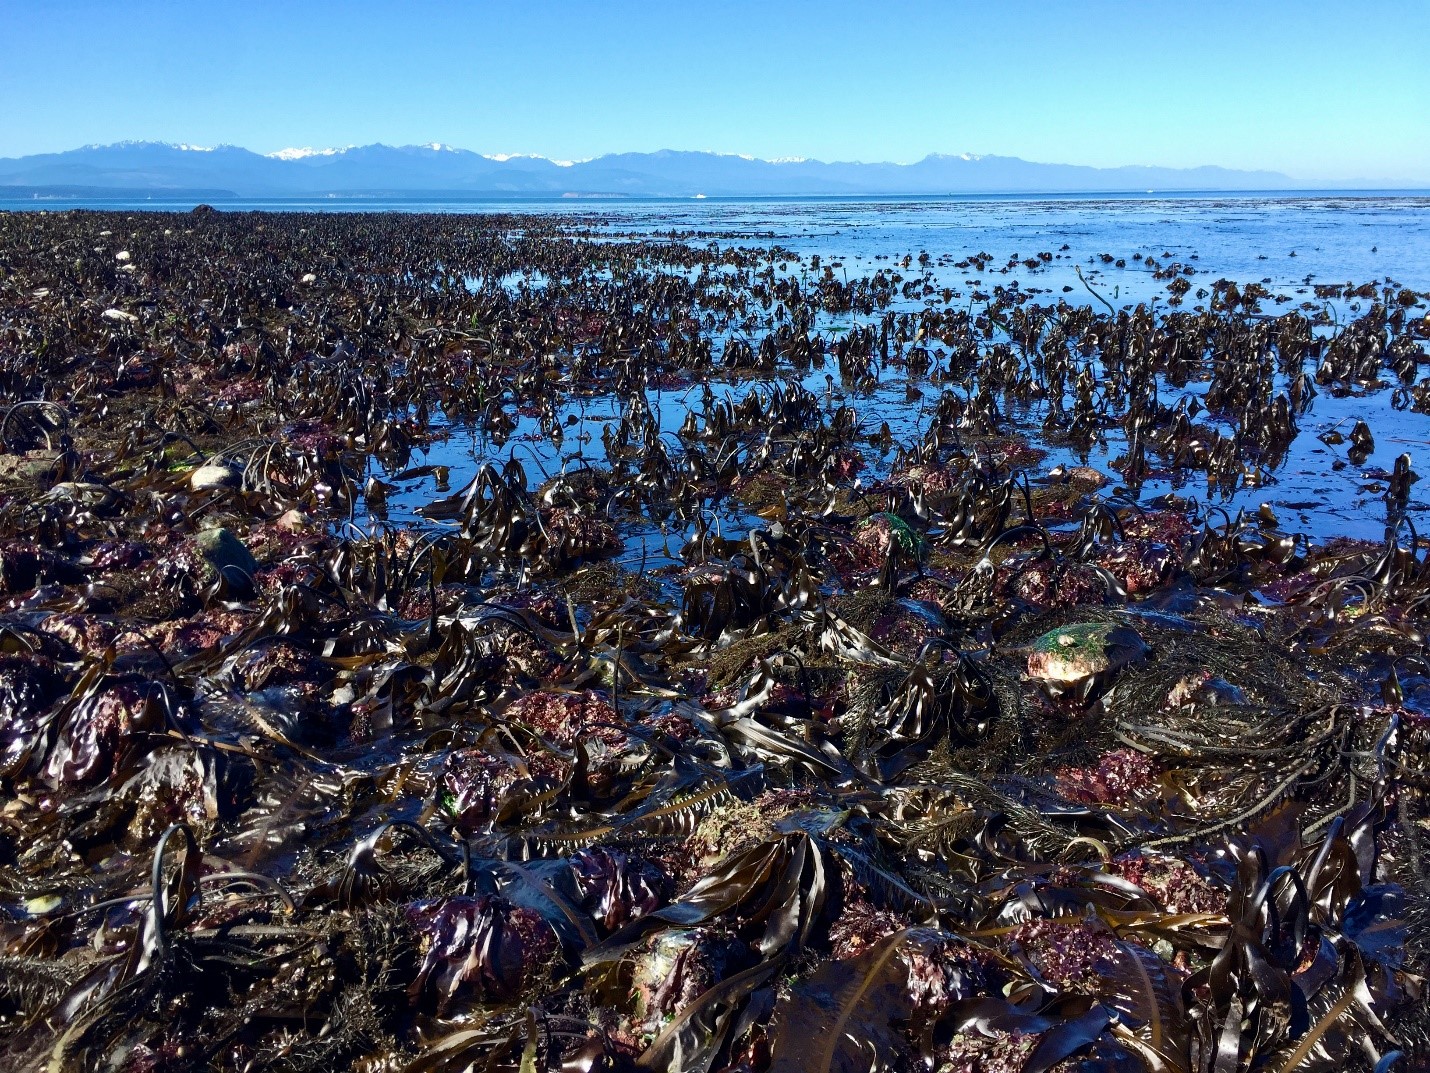 Photo of Setchell's kelp in the water by Ebey's Landing. Photo credit: Tom Mumford. 